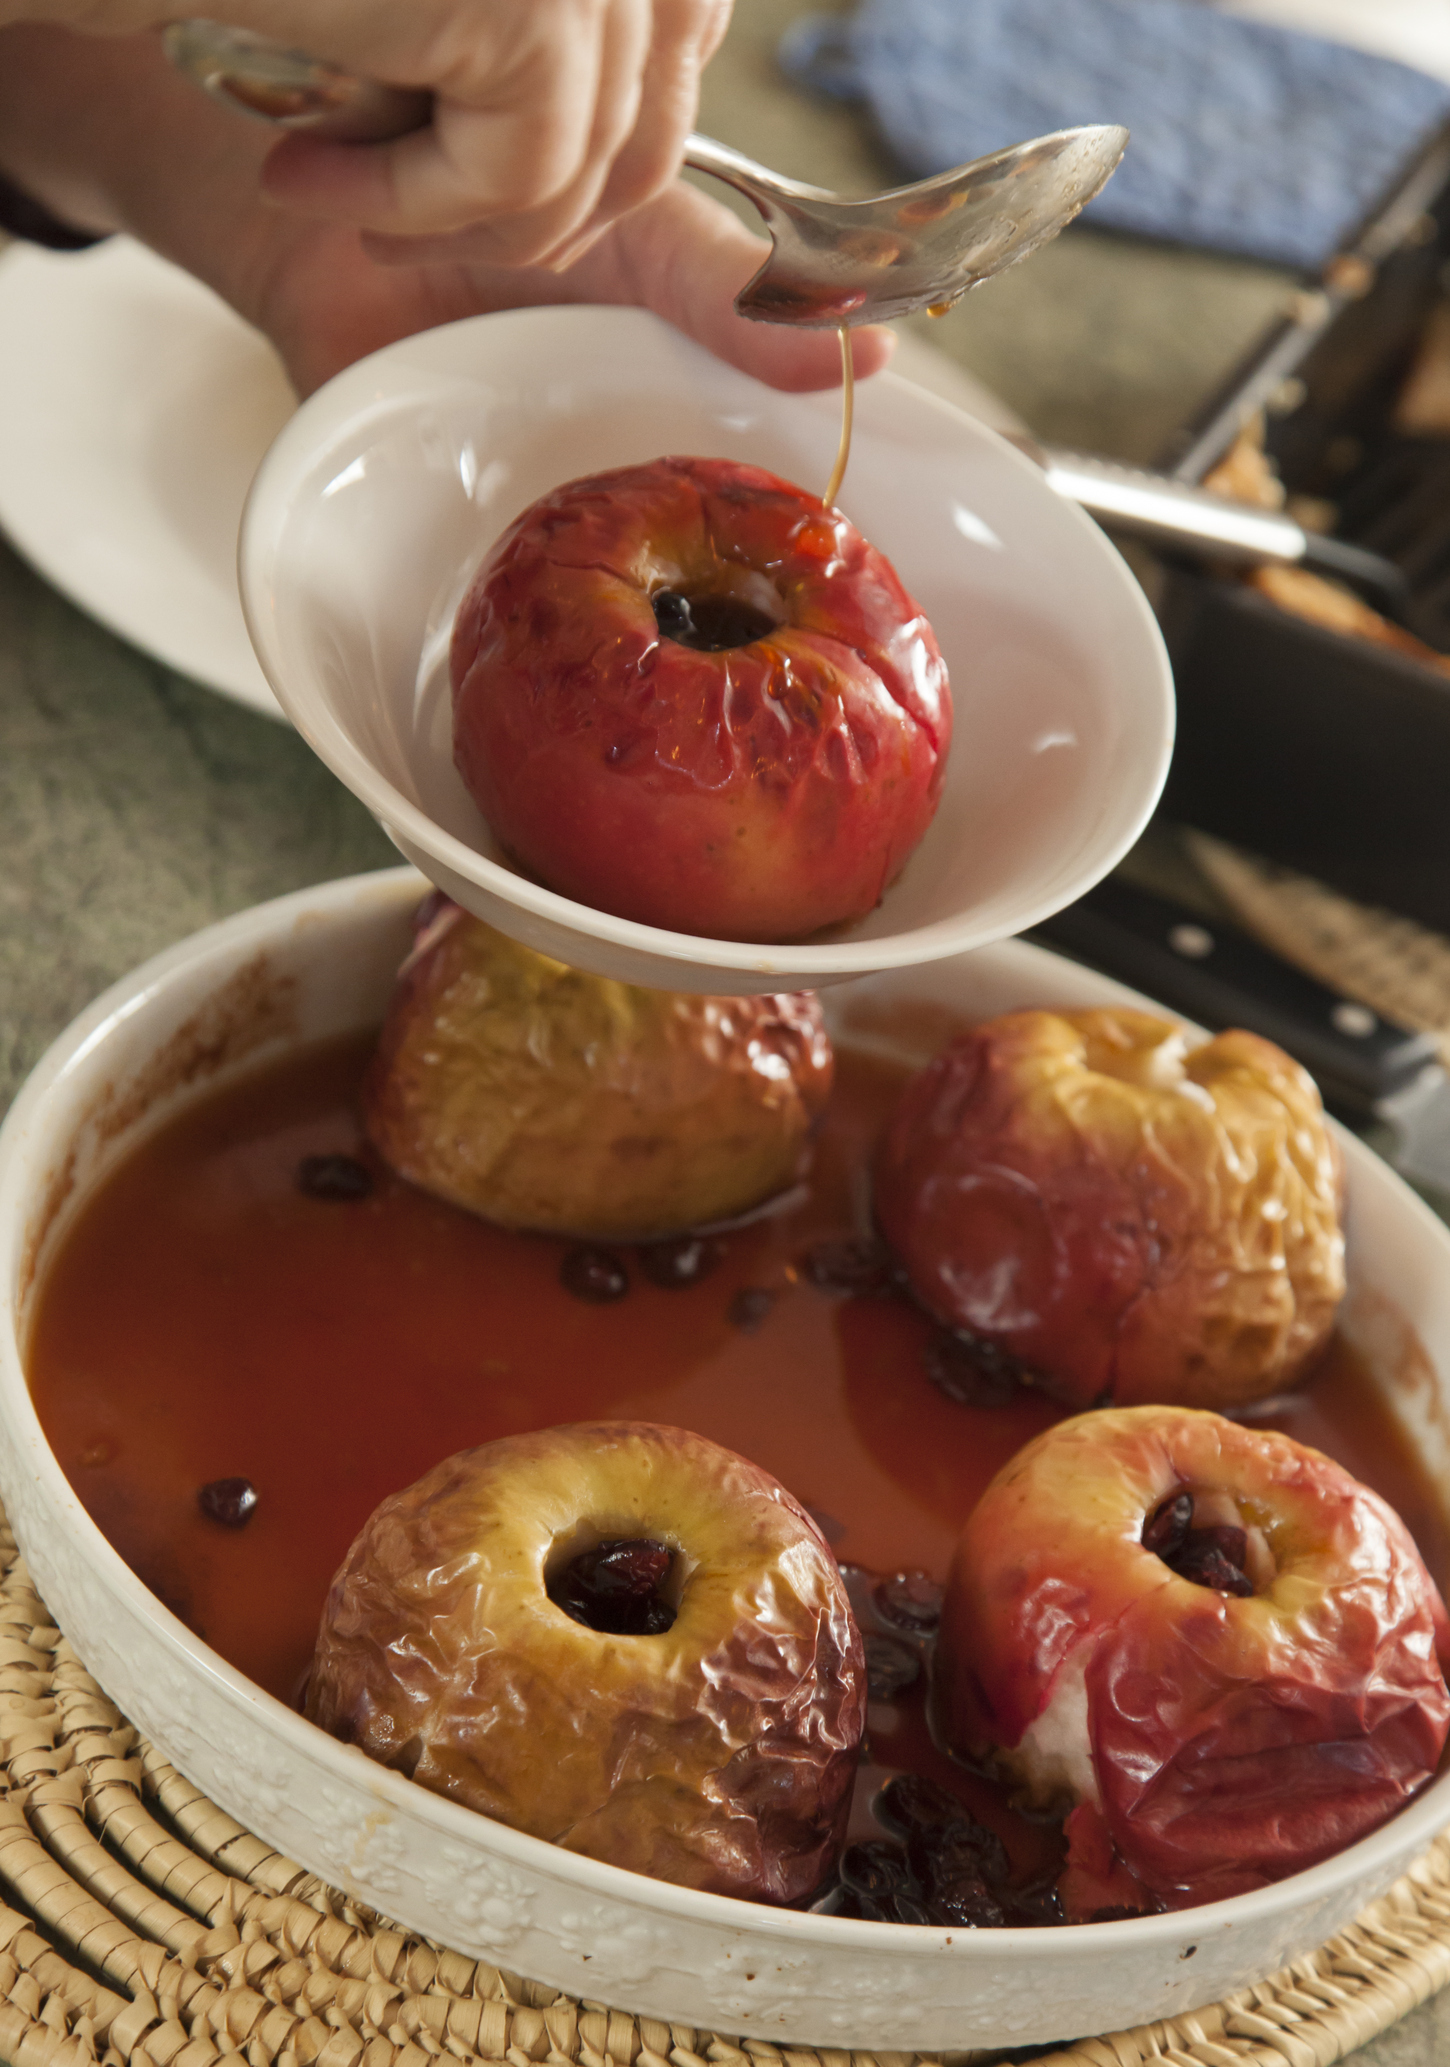 <p>The dessert version of baked apples can be drizzled with honey or caramel or stuffed with sweet components as in <a href="http://www.simplyrecipes.com/recipes/baked_apples/">this recipe from SimplyRecipes.com.</a></p><p><a href='https://www.msn.com/en-us/community/channel/vid-cj9pqbr0vn9in2b6ddcd8sfgpfq6x6utp44fssrv6mc2gtybw0us'>Follow us on MSN to see more of our exclusive lifestyle content.</a></p>